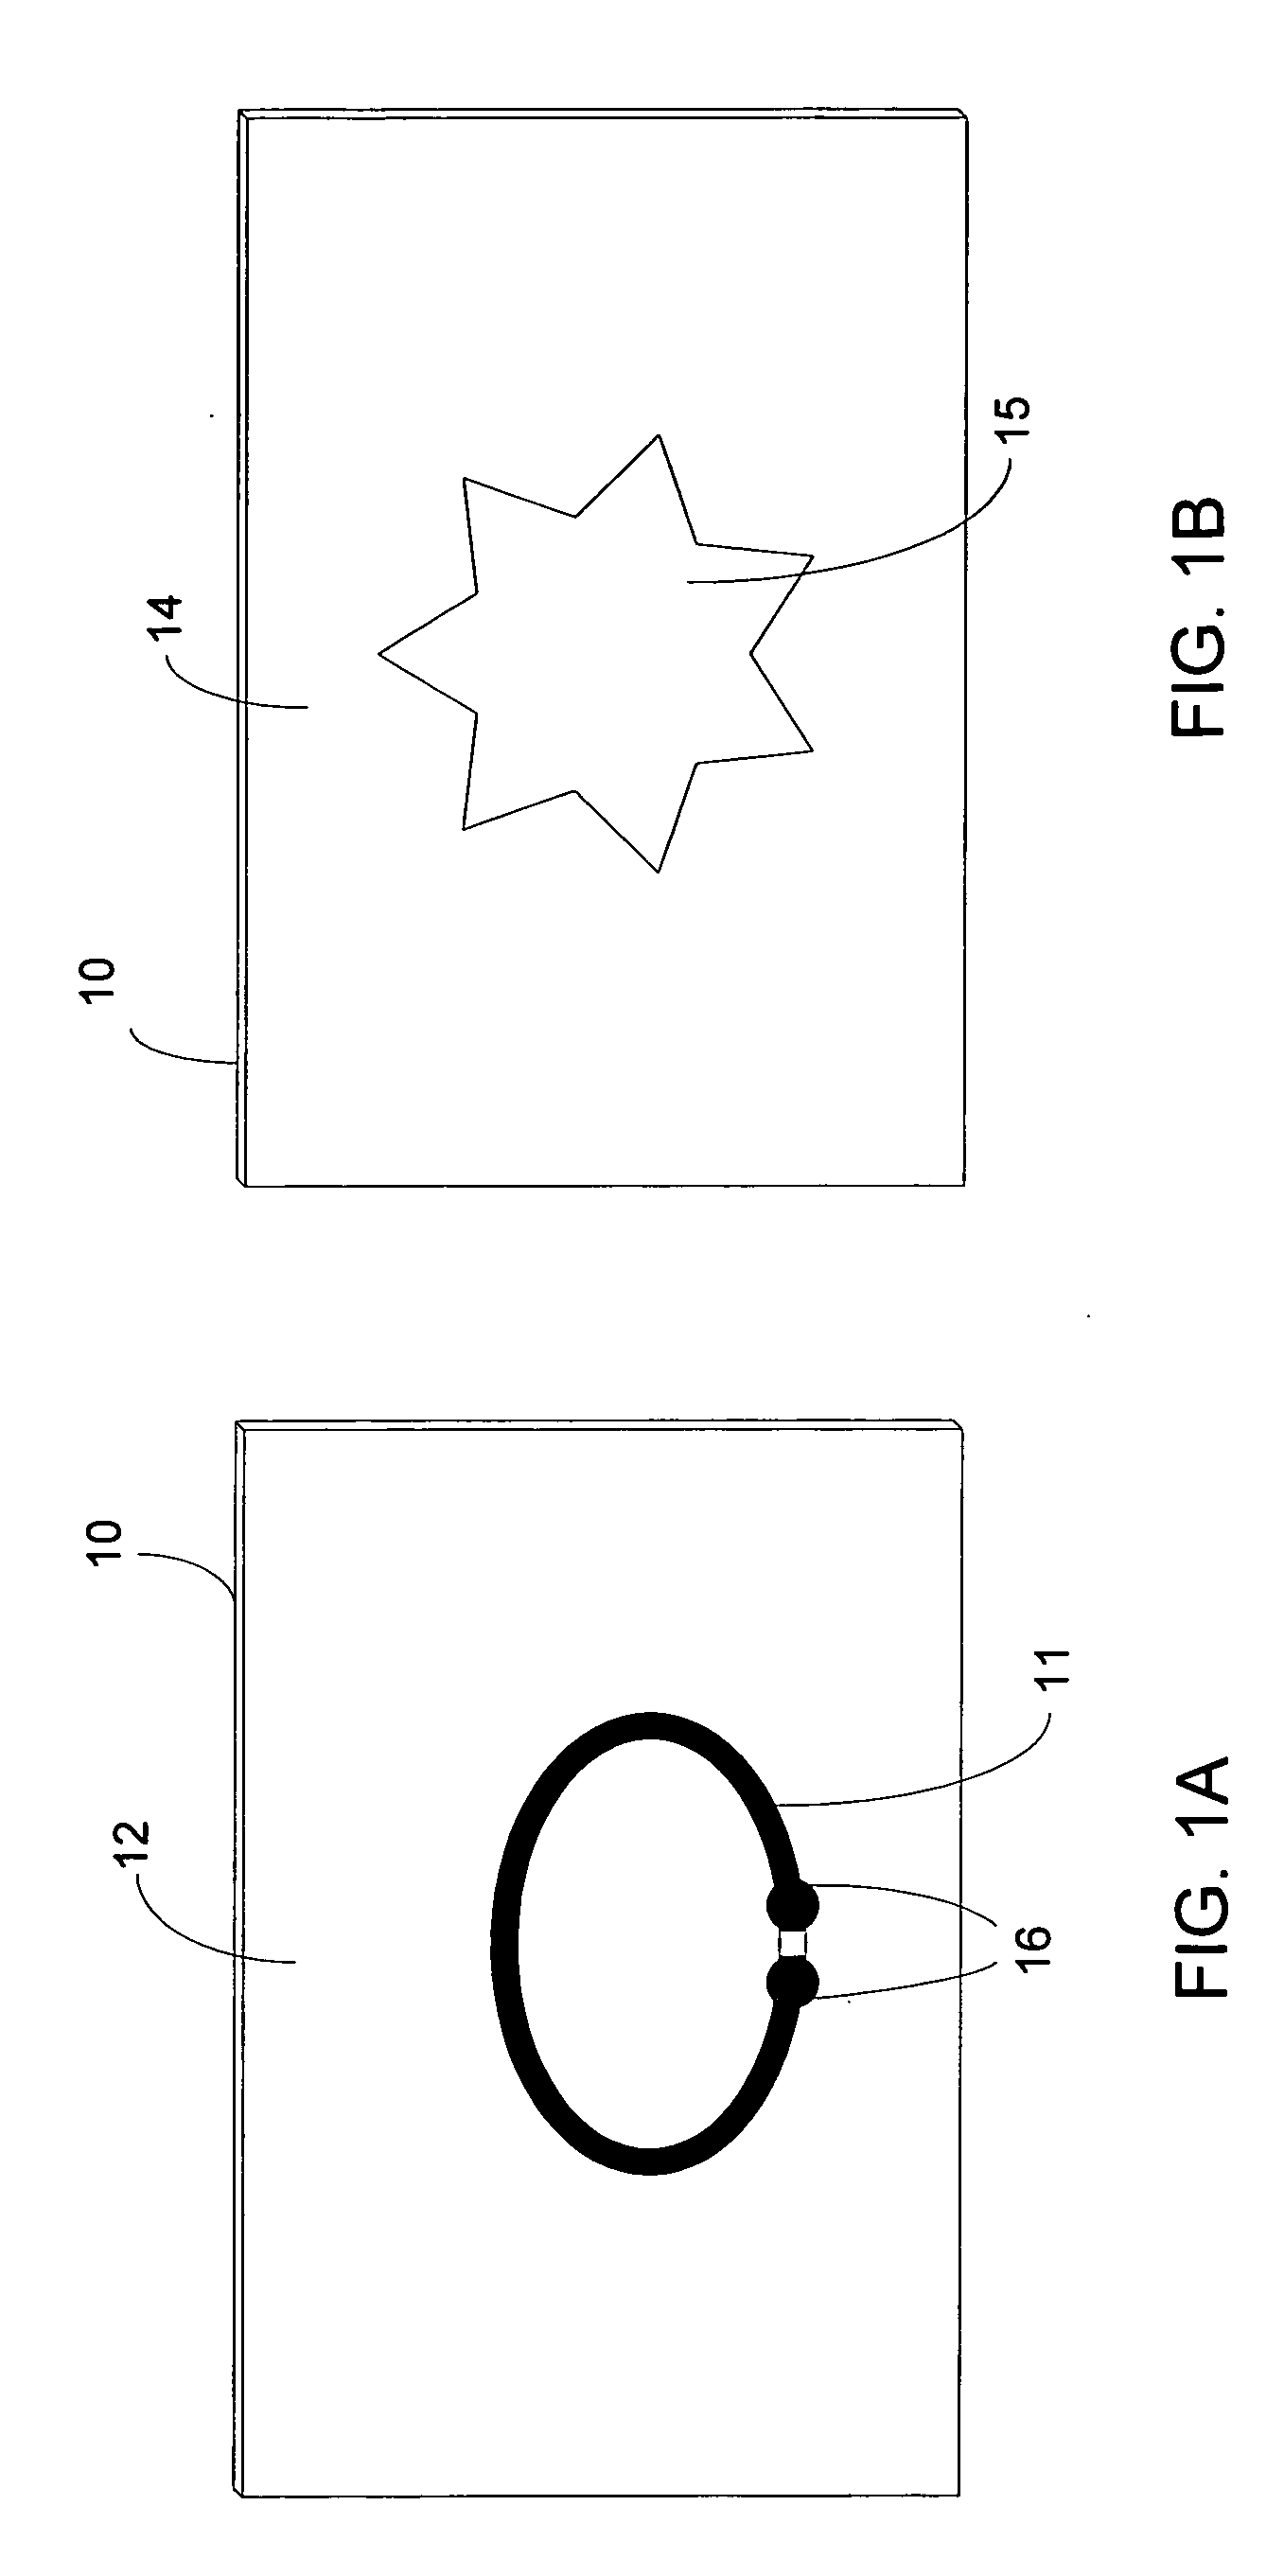 Method for printing an electronic circuit component on a substrate using a printing machine